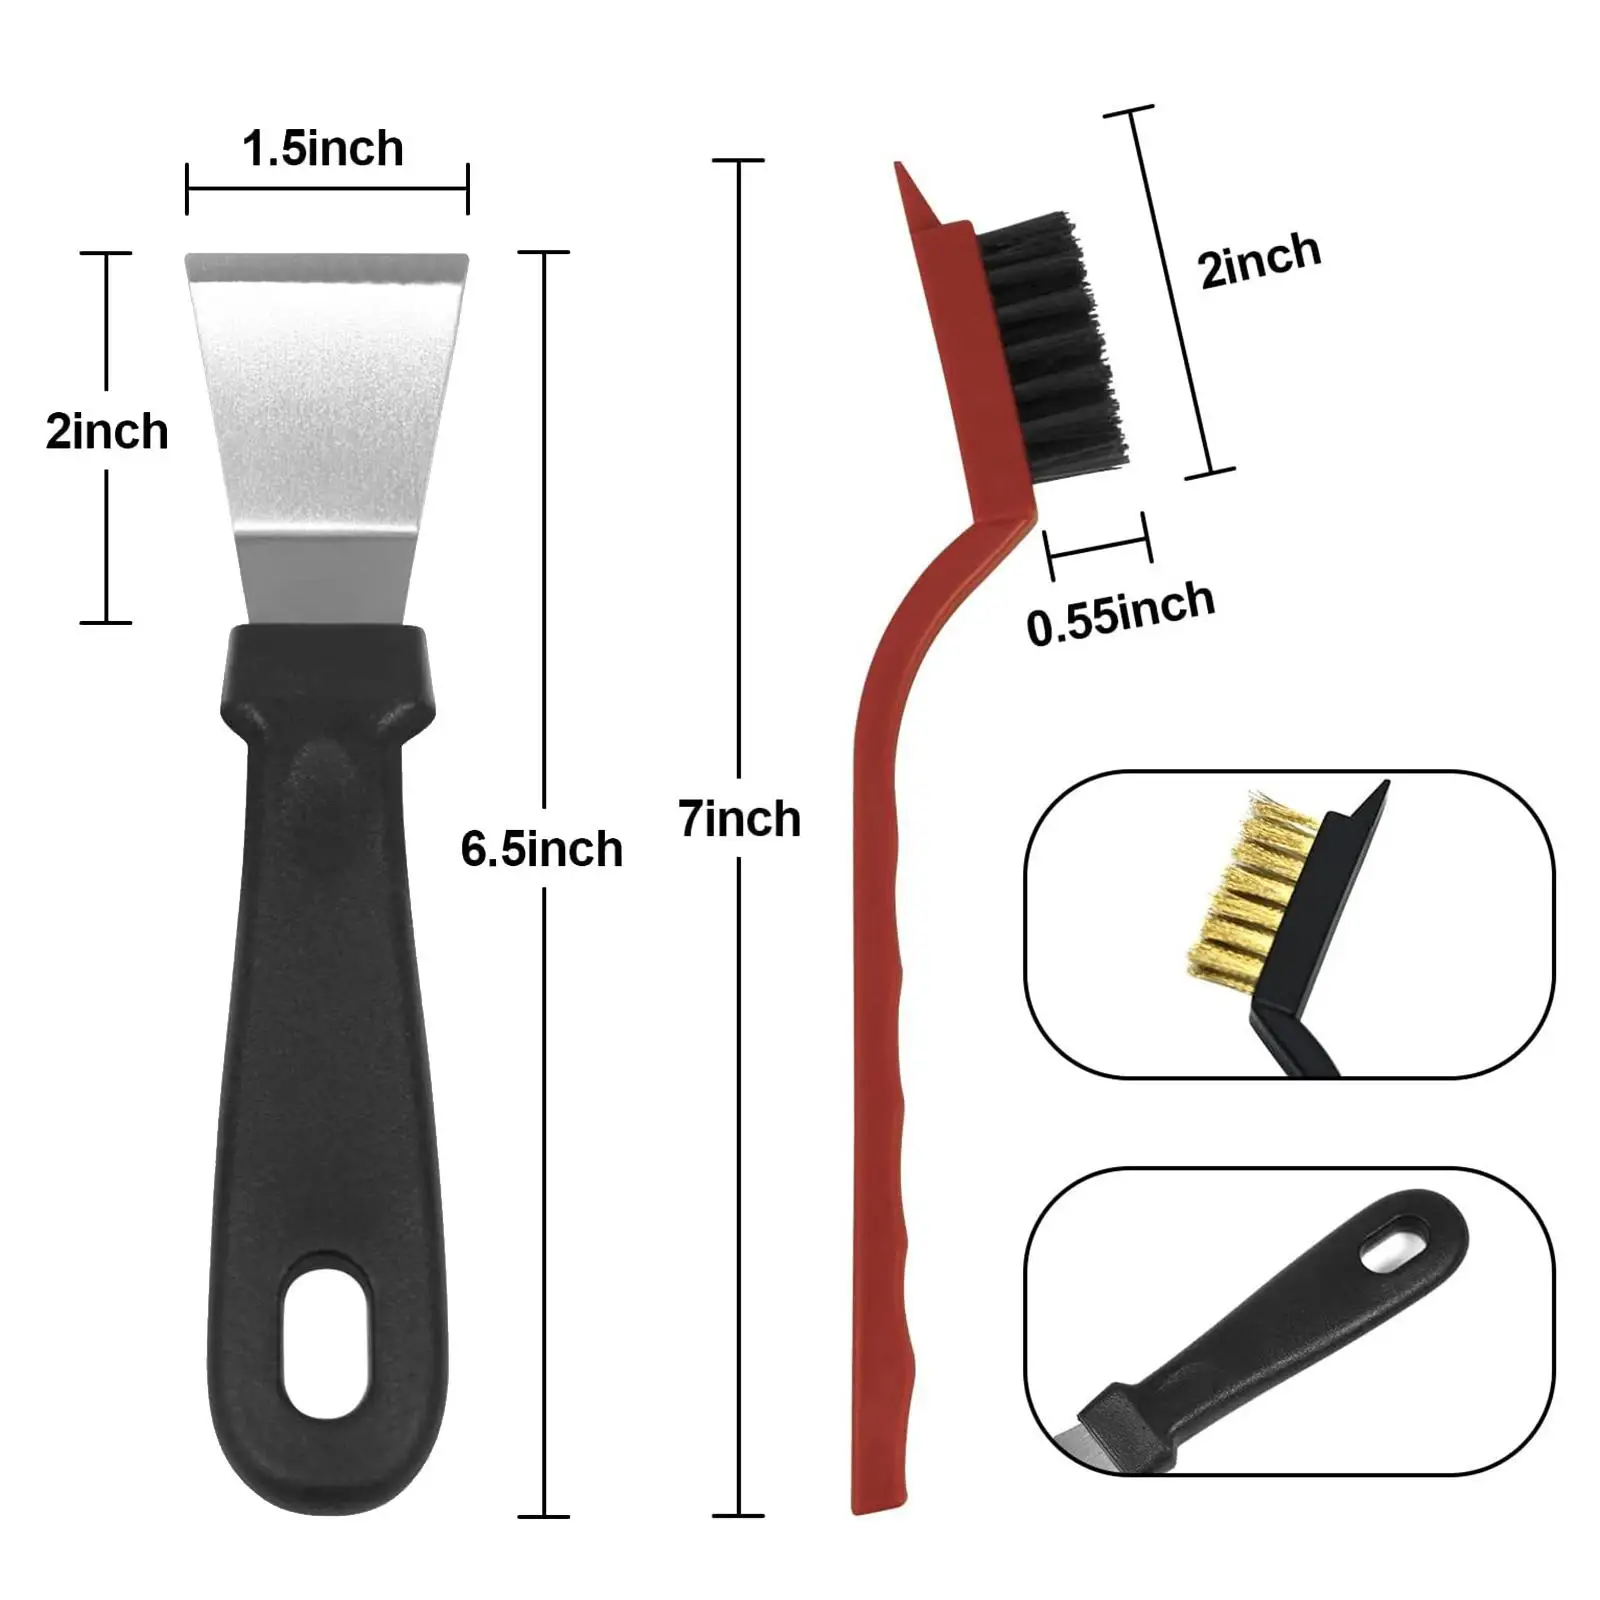 5x Wire Brush Set Scraper Tool with Curved Handle Grip Brass/Stainless Steel/Nylon Wire Brushes Stove Cleaning Brush